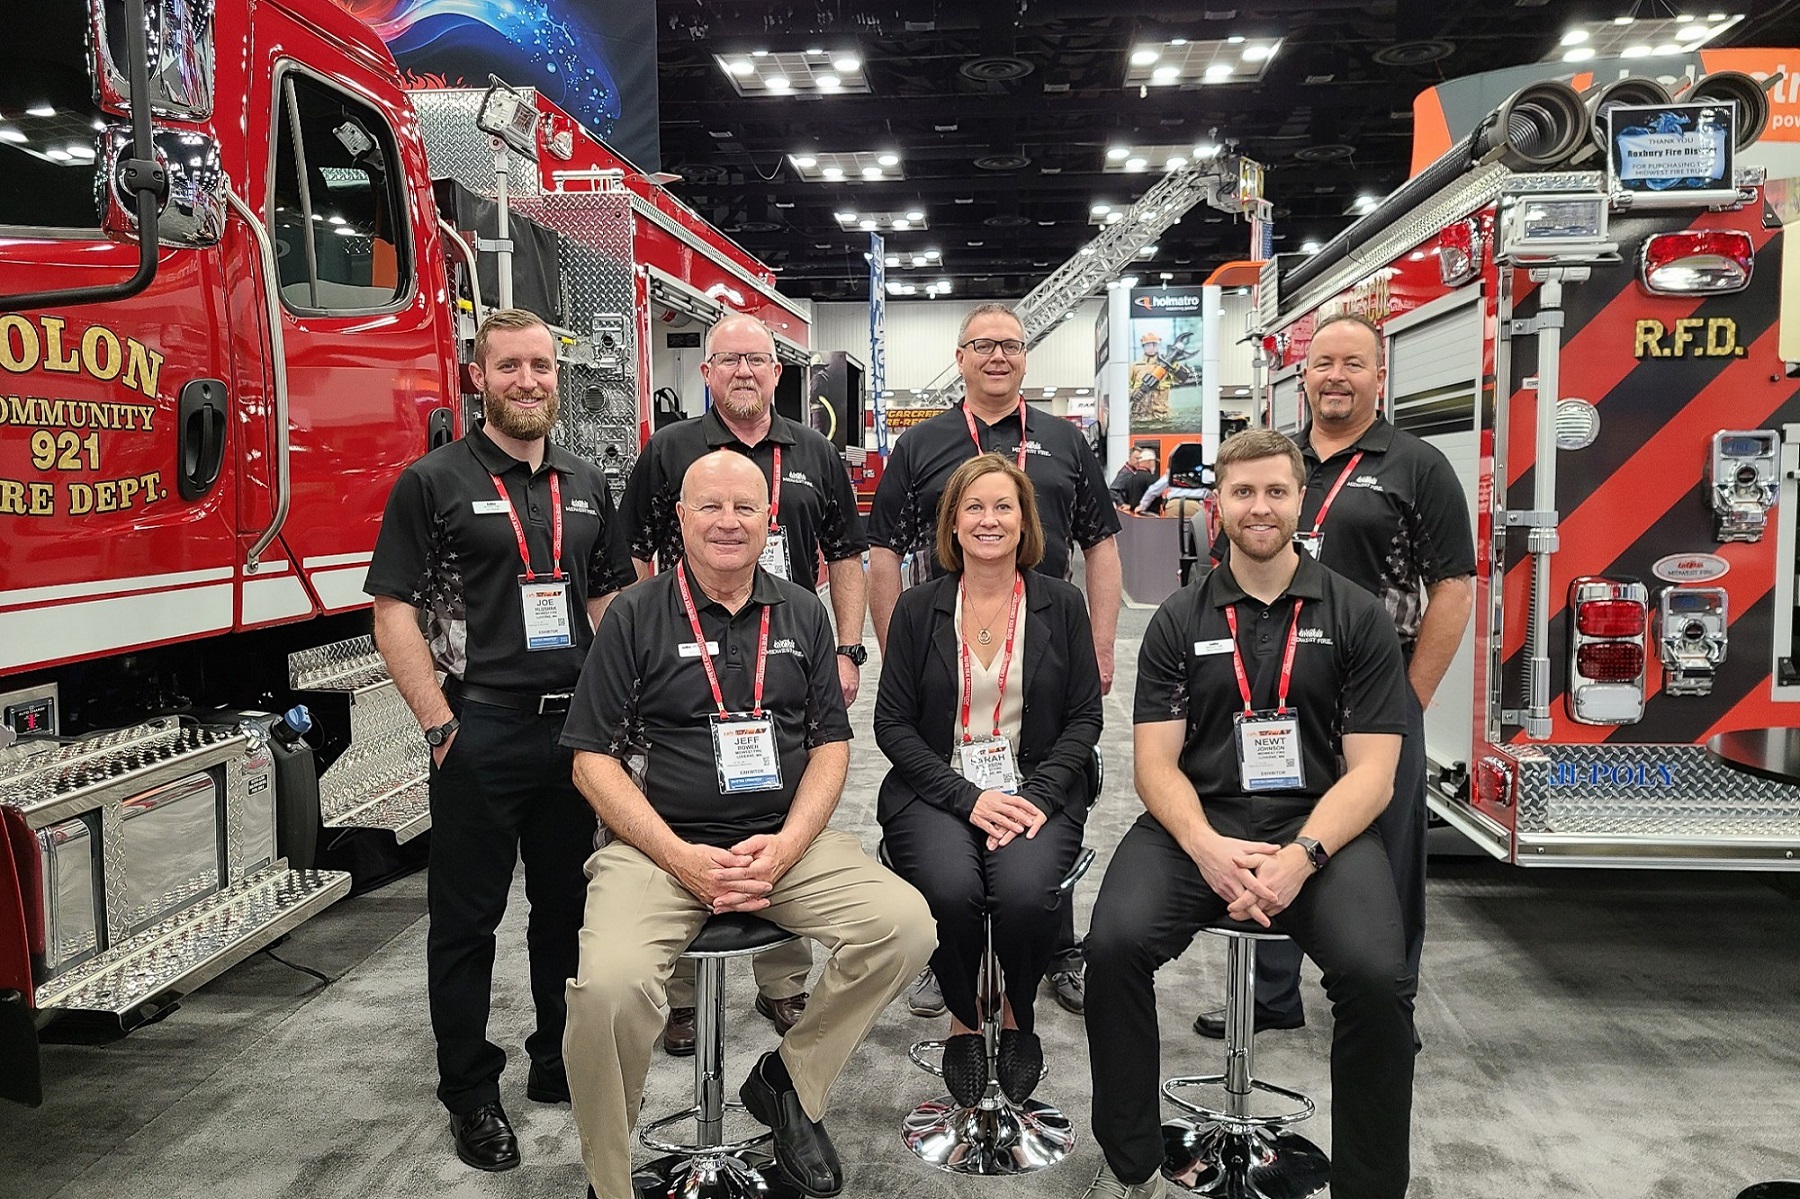 Sarah Atchison and her manufacturing team posing in front of their firetrucks.